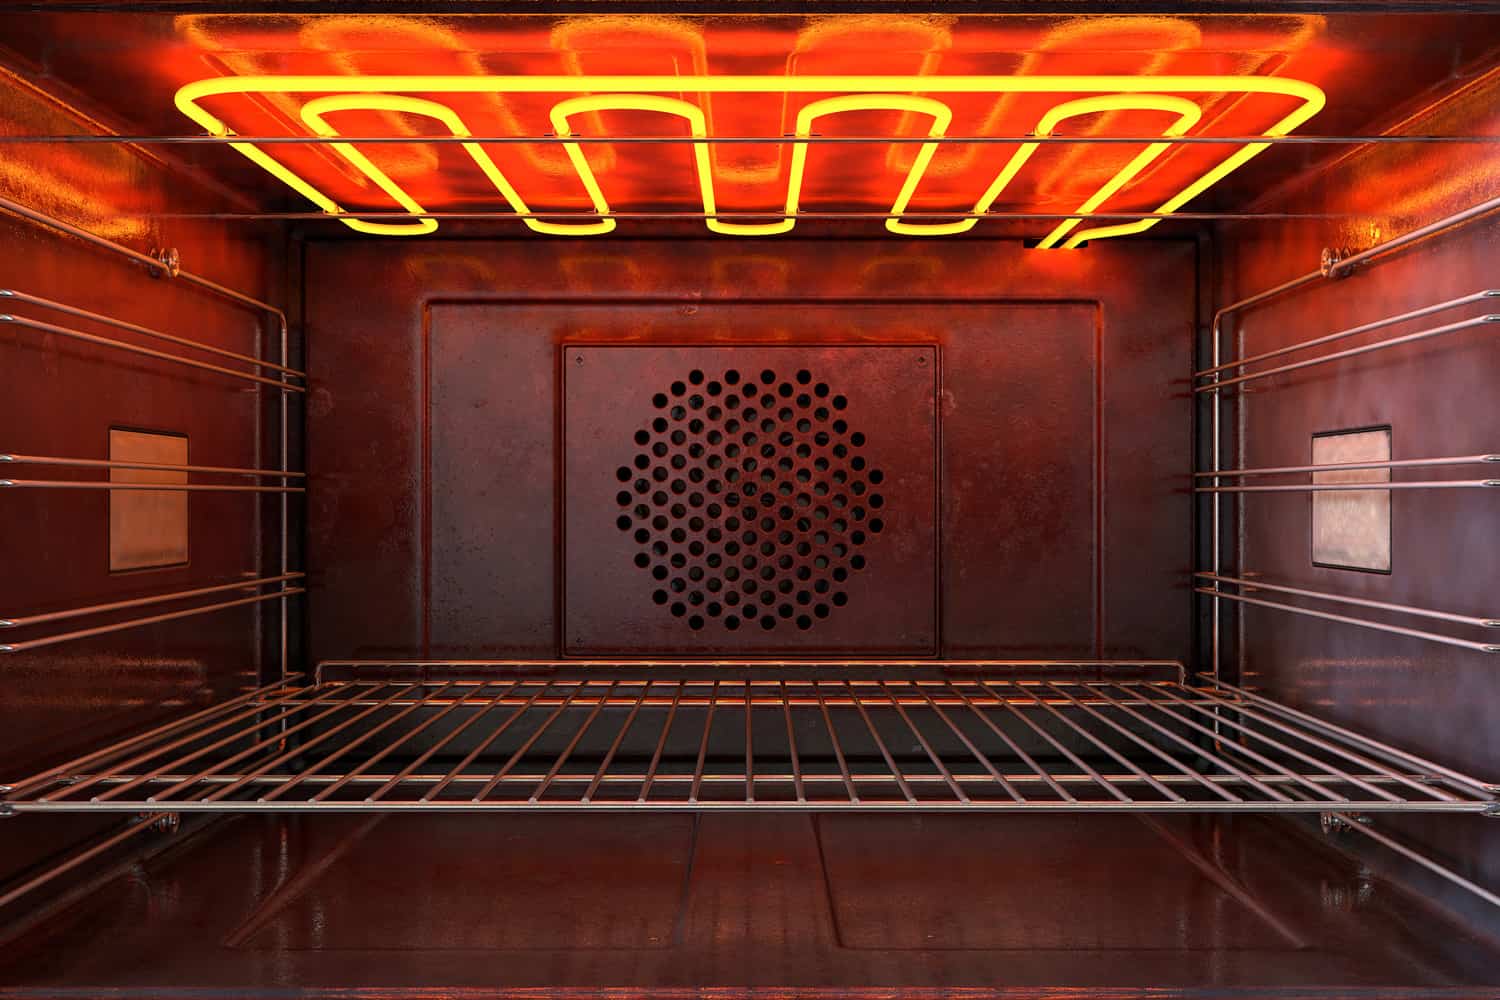 An upclose view through the front of the inside of an empty hot operational household oven with a glowing element and metal rack 